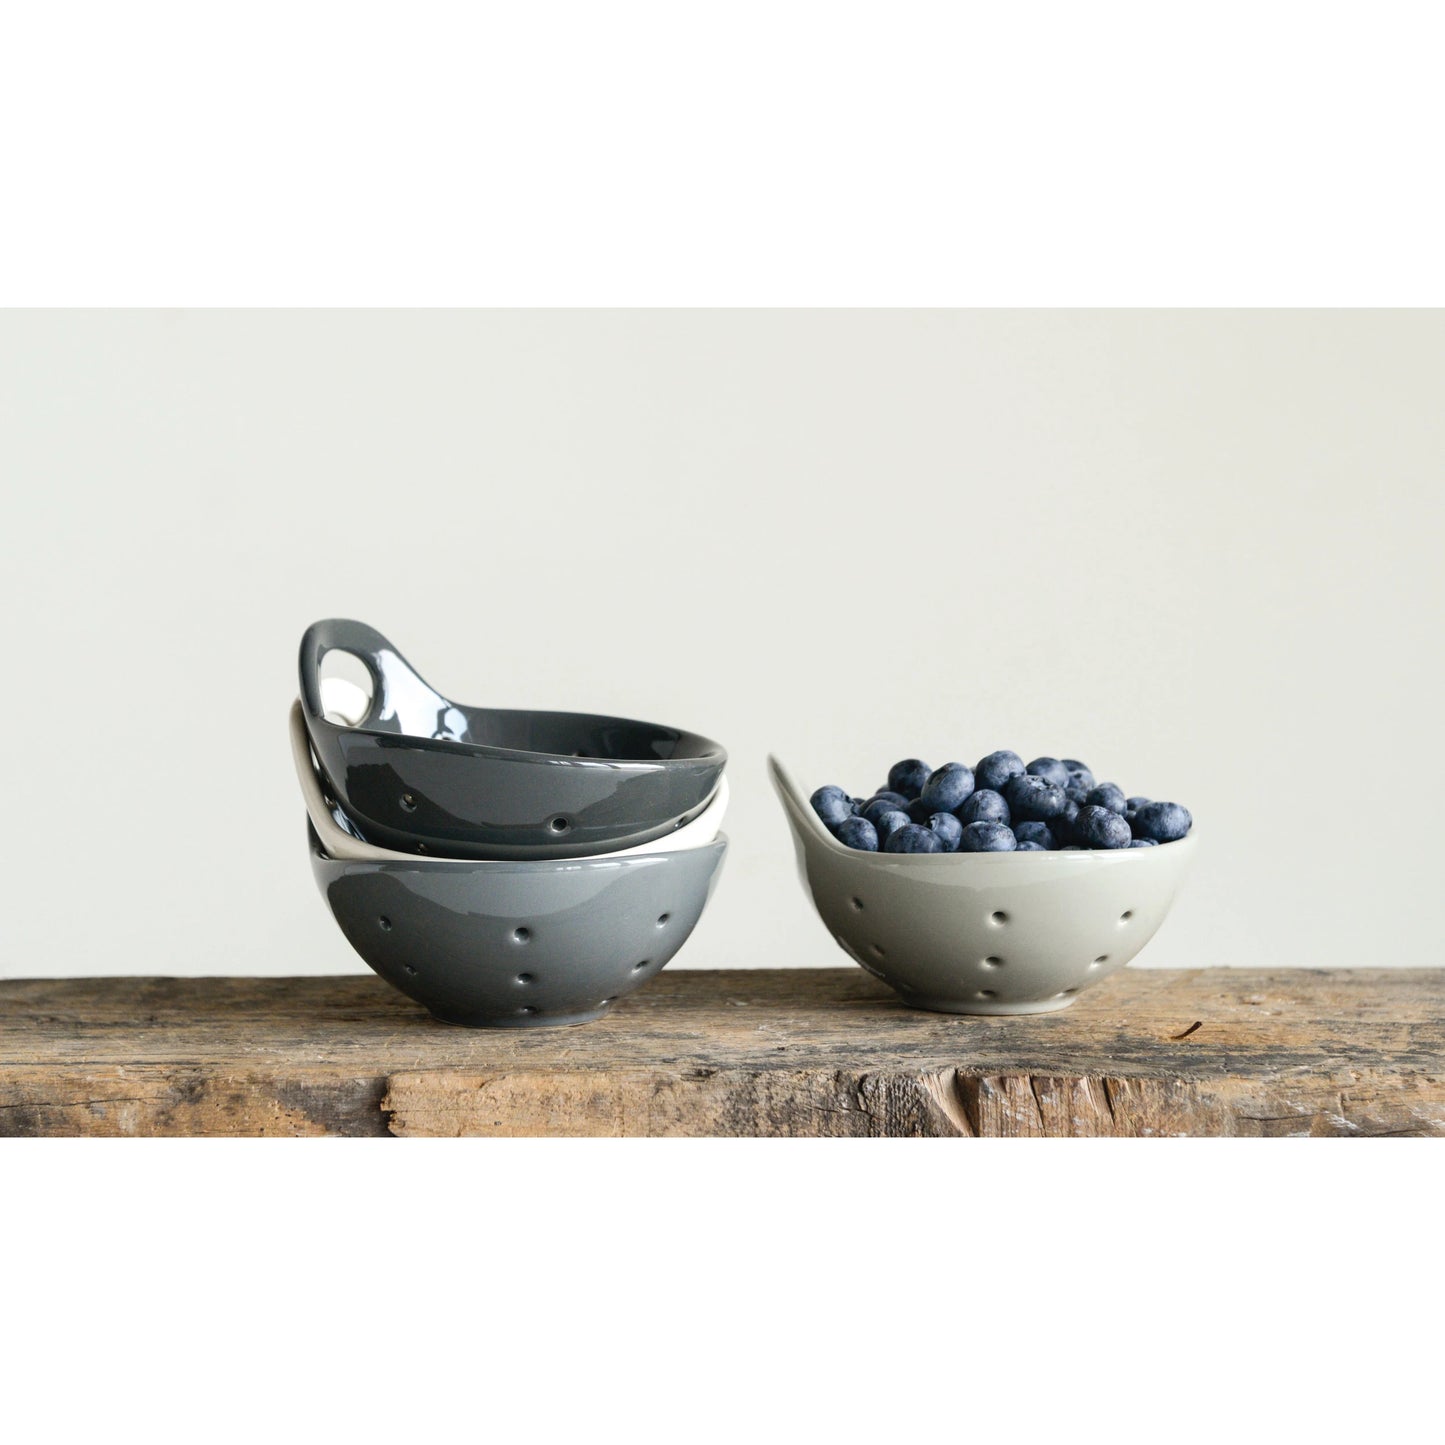 the gray stoneware berry bowl filled with blueberries and the other three colors stacked next to it and displayed on a rustic wood slab